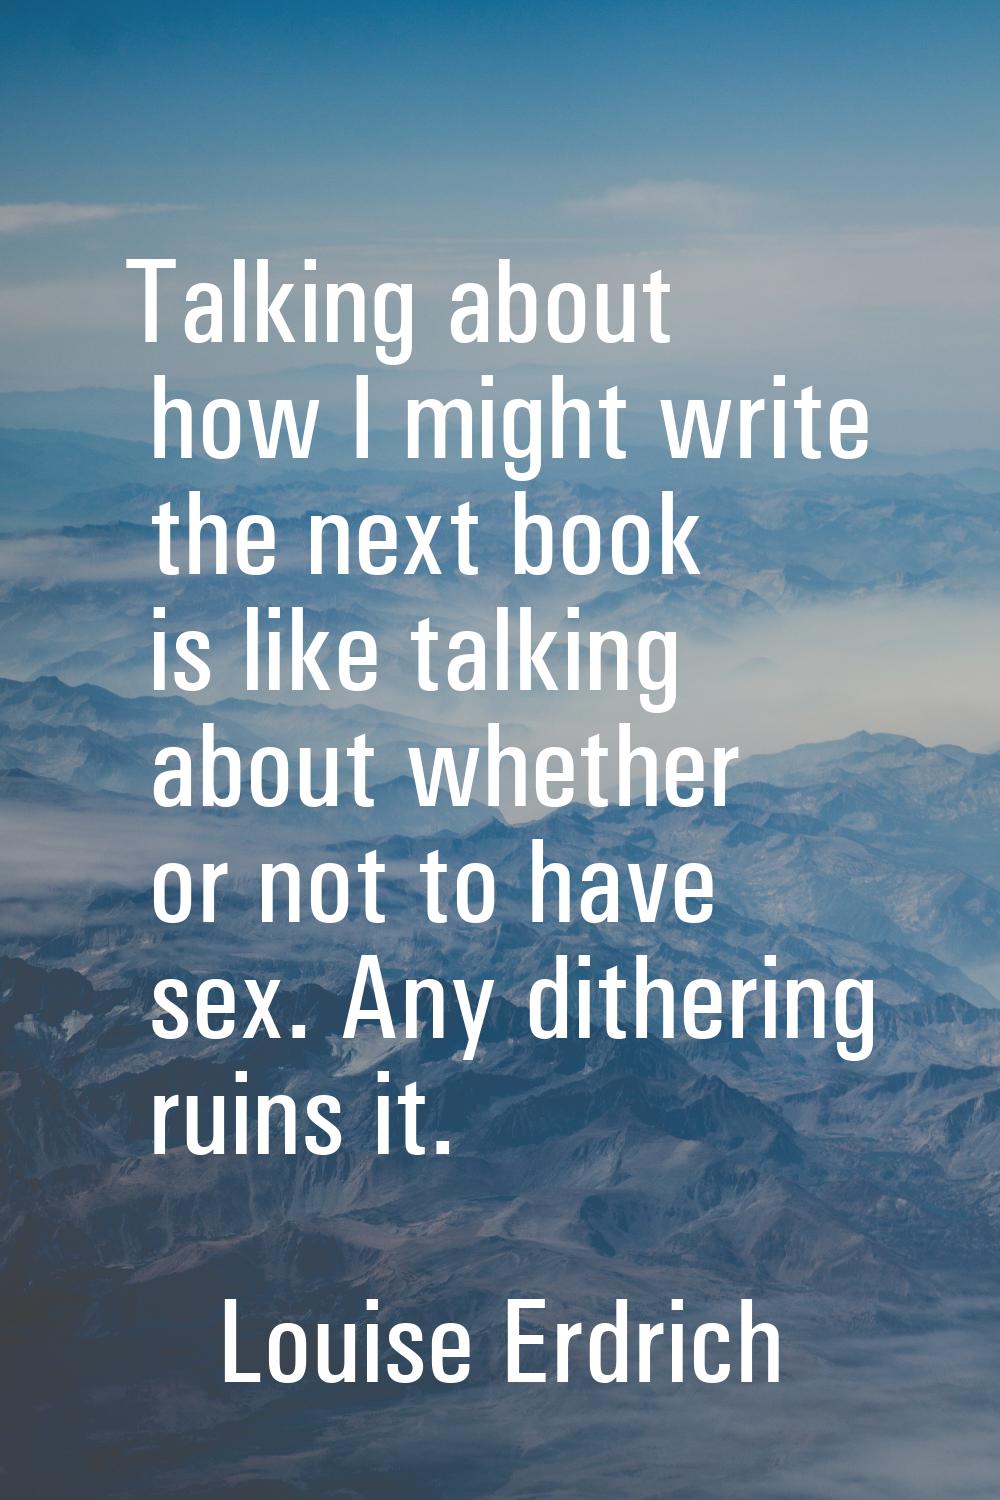 Talking about how I might write the next book is like talking about whether or not to have sex. Any